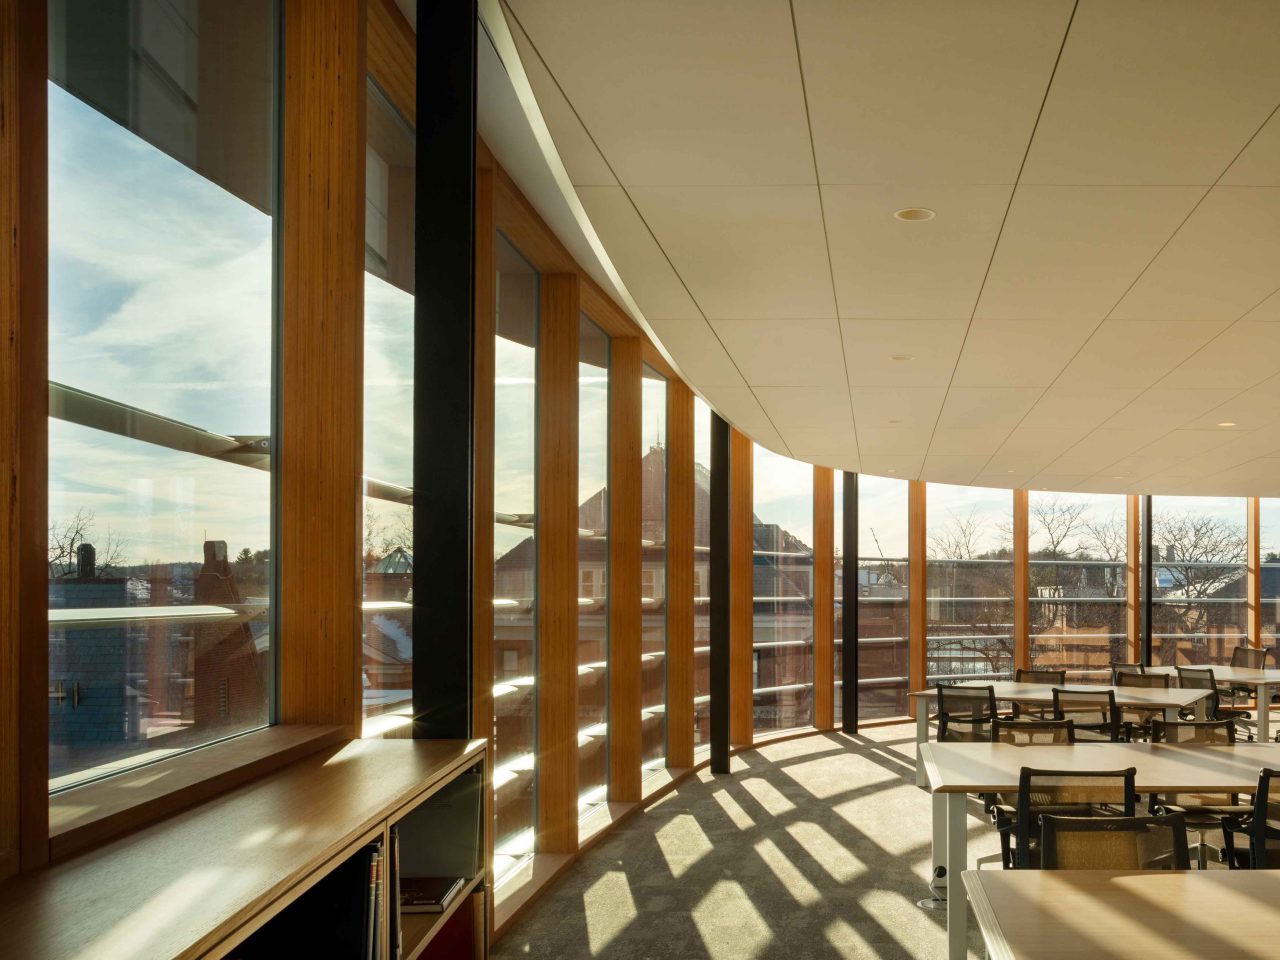 Smith College Neilson Library interior wood facade with curved insulated glass